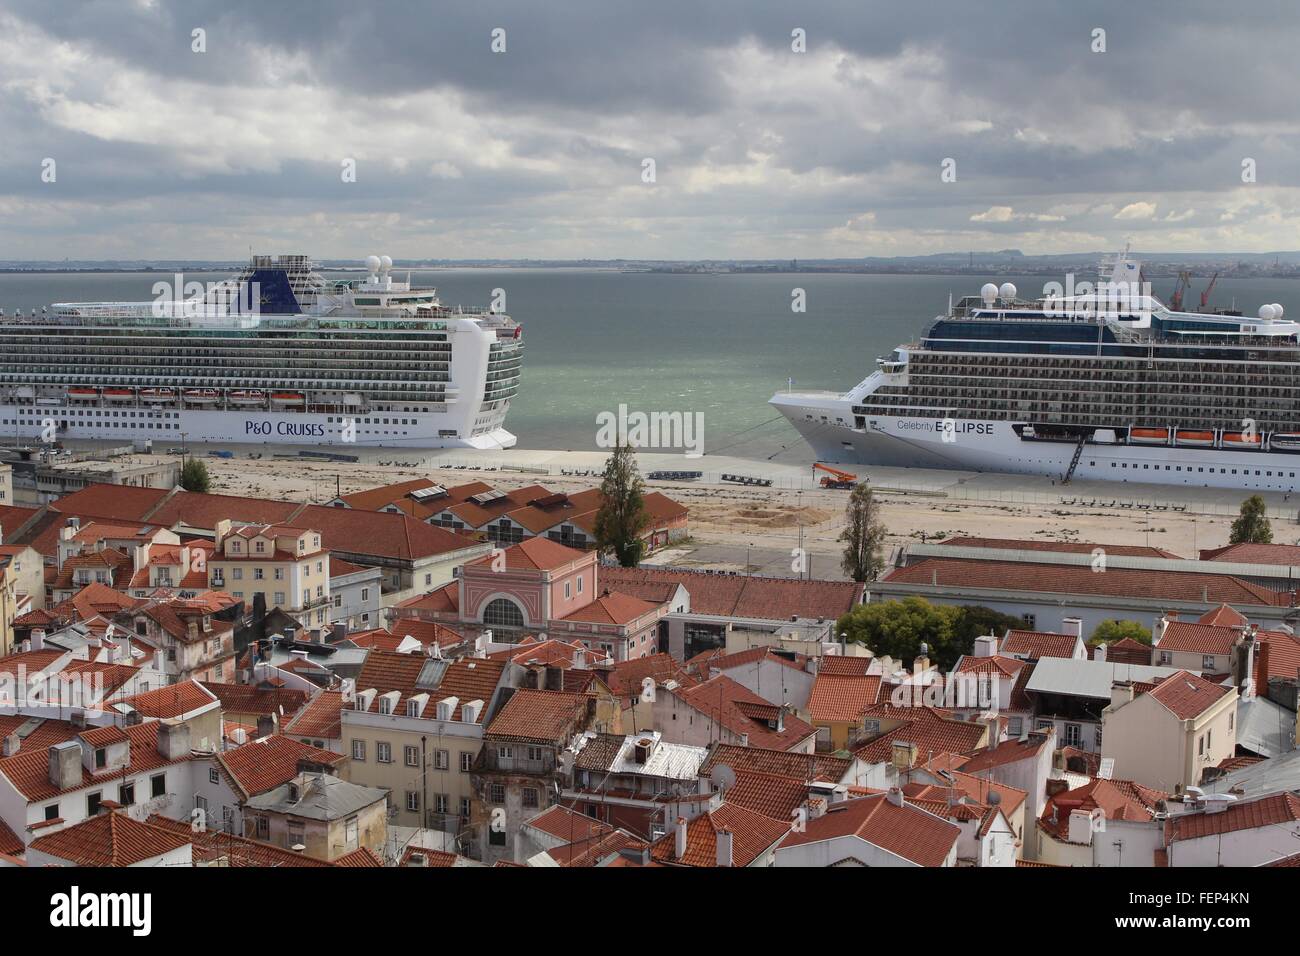 Overwhelming appearance  of two cruise ships close to town buildings Stock Photo